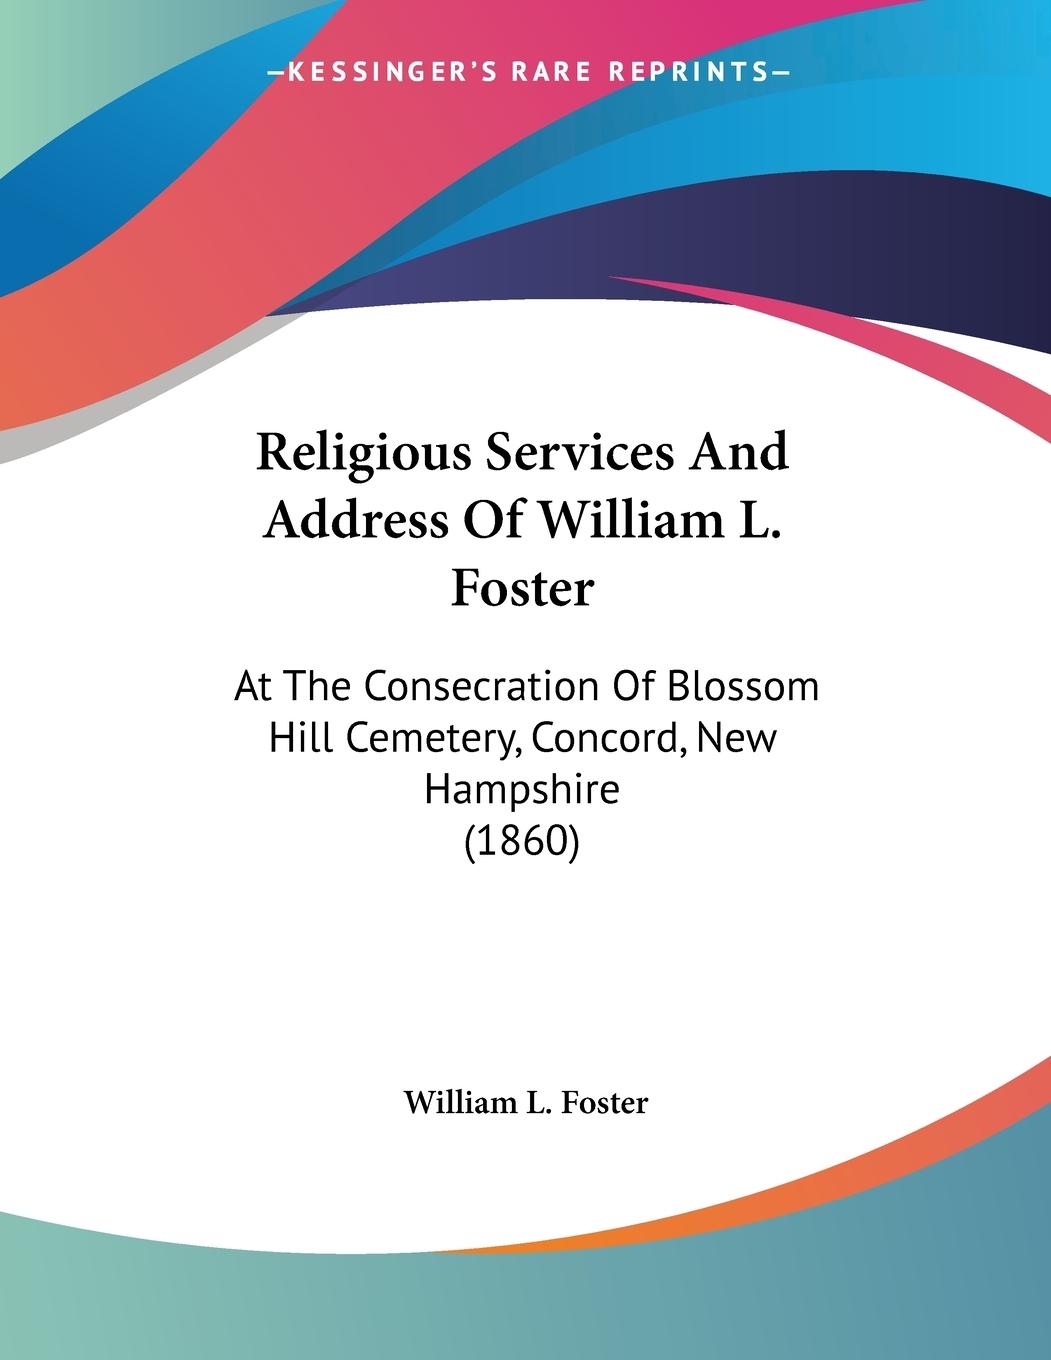 Religious Services And Address Of William L. Foster - Foster, William L.